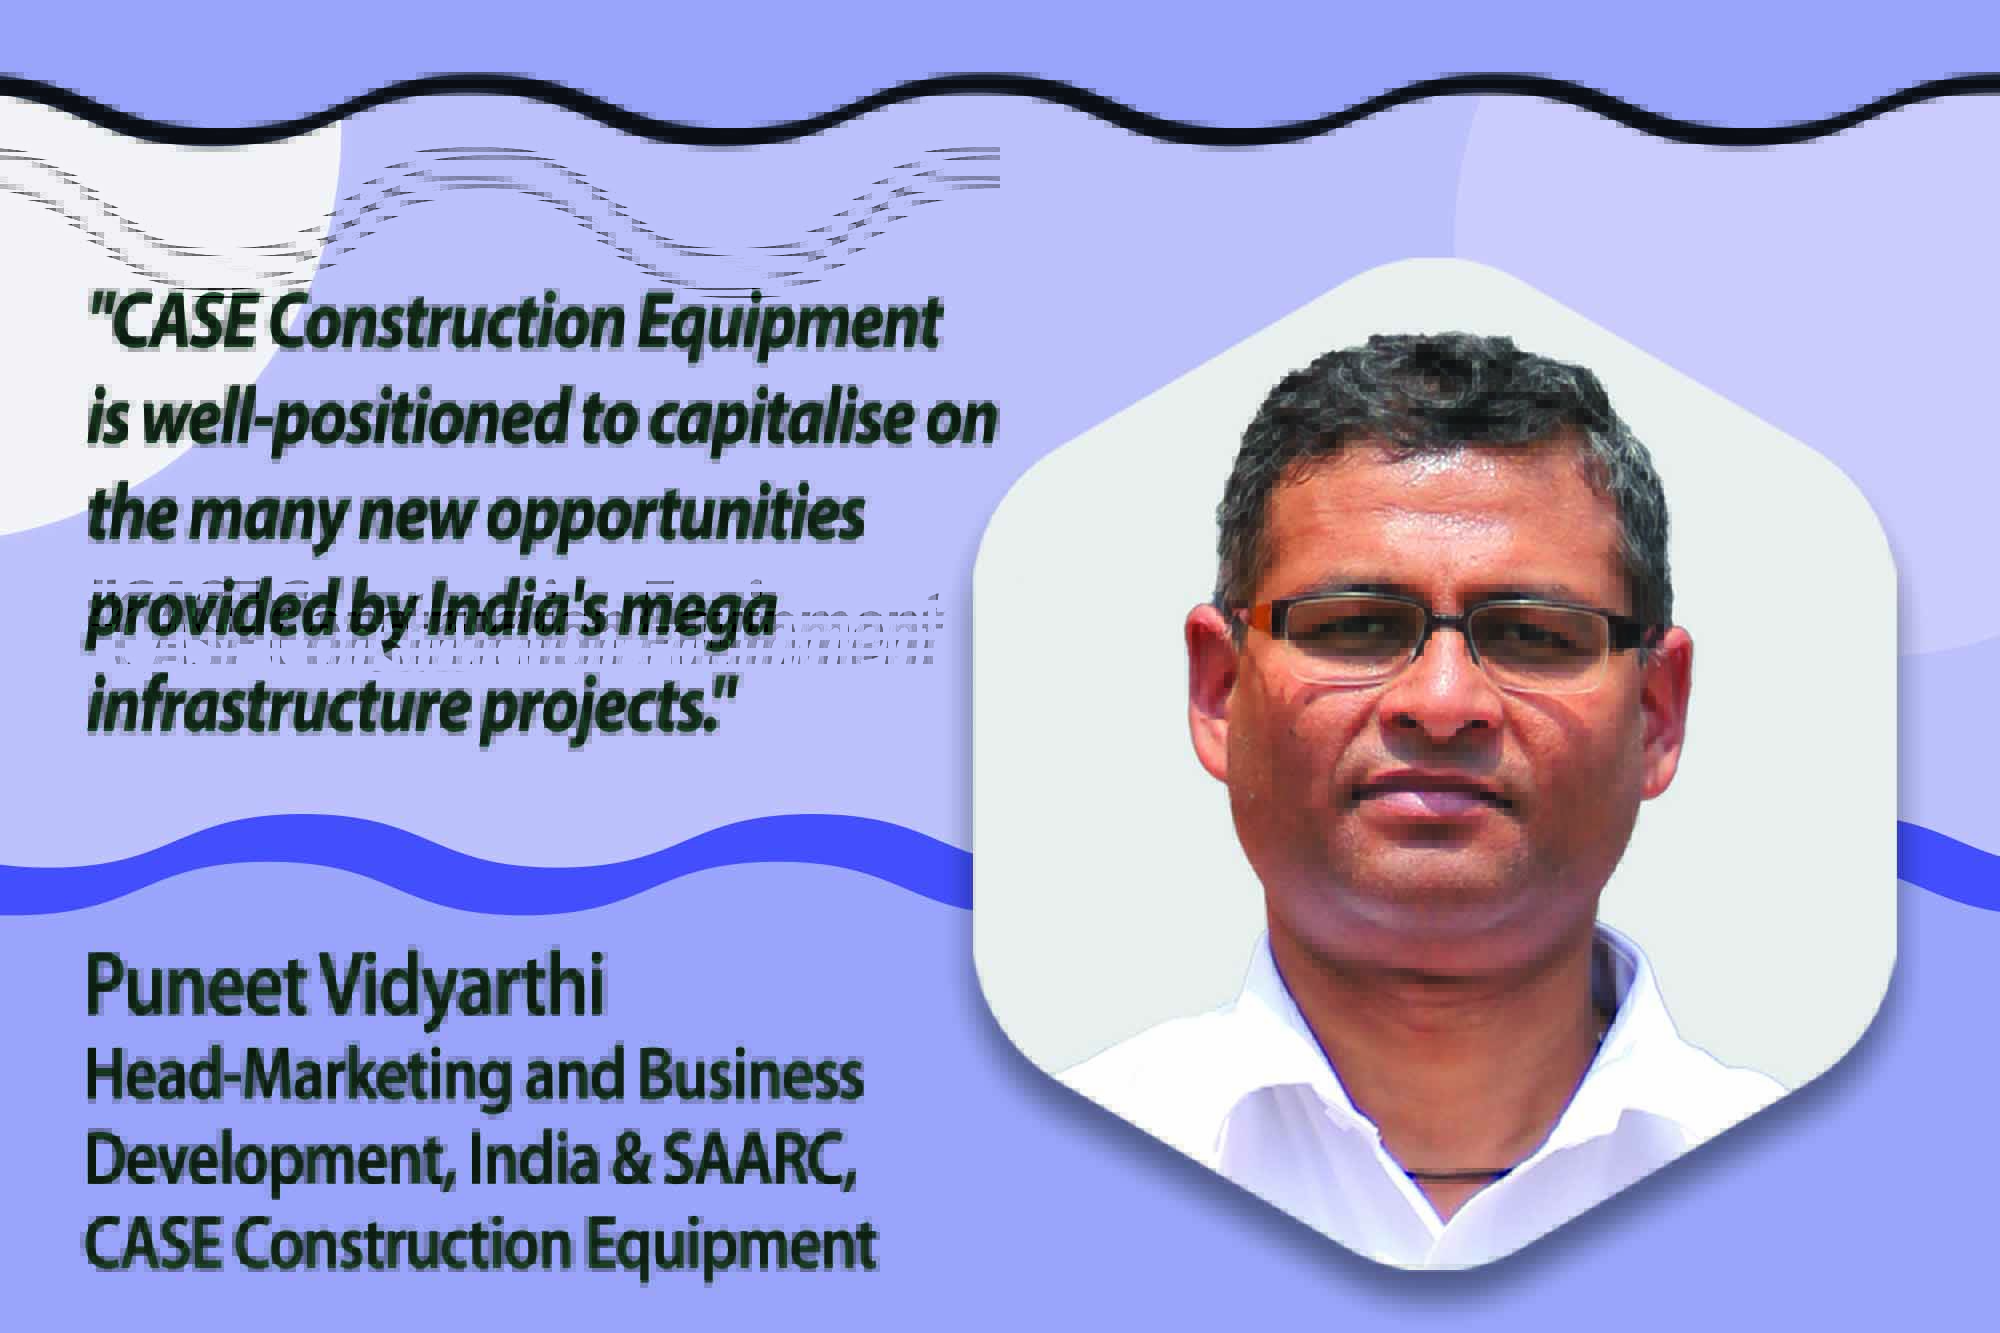 Explore the evolution of India's infrastructure with Puneet Vidyarthi, witnessing how CASE's visionary strategies allow success to be incorporated into every project.